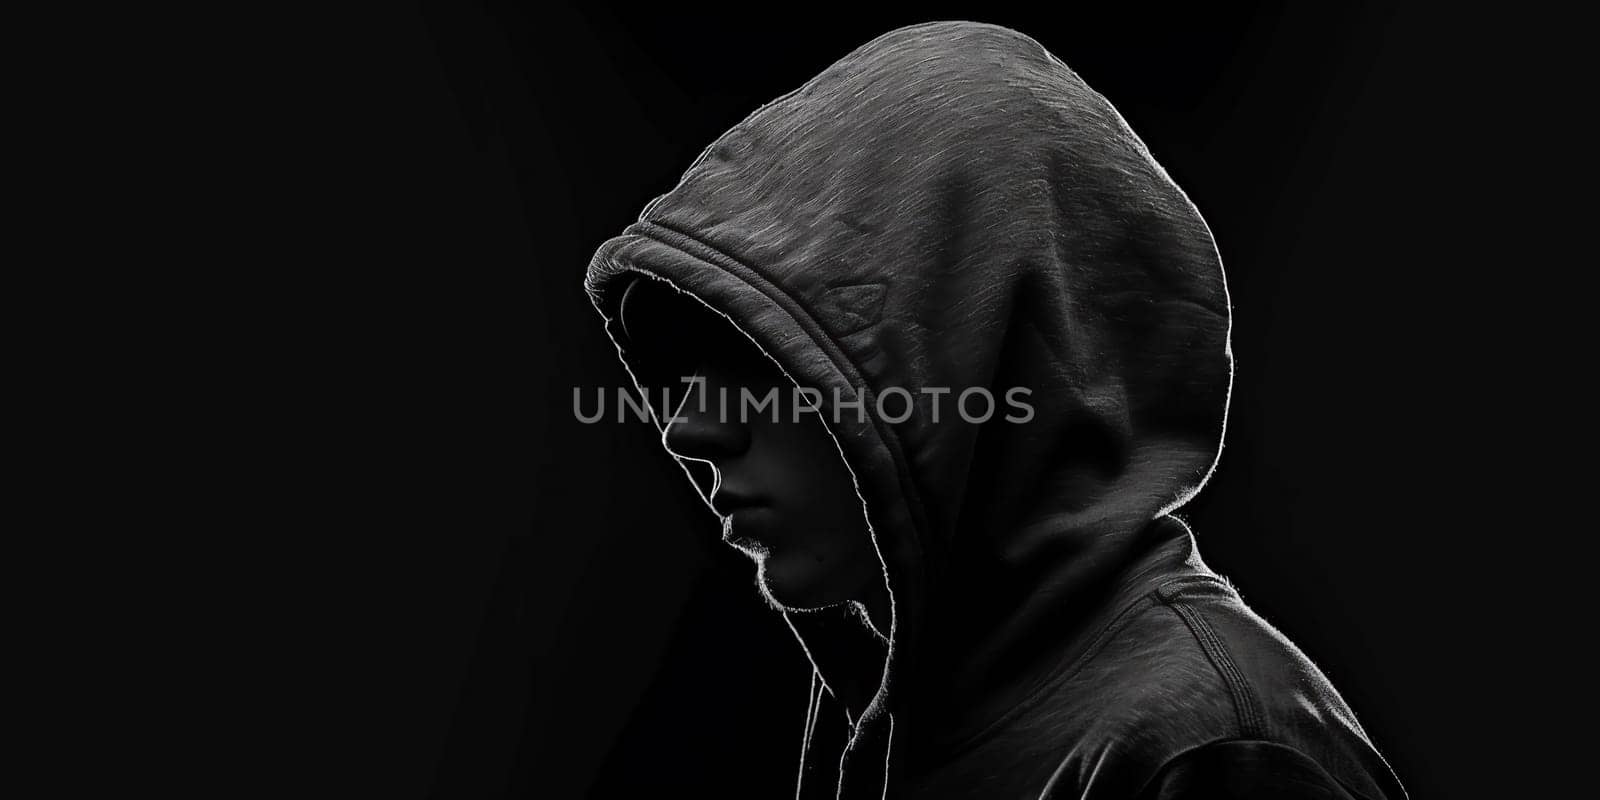 An adult online anonymous internet hacker with invisible face in urban environment and number codes illustration concept by Andelov13